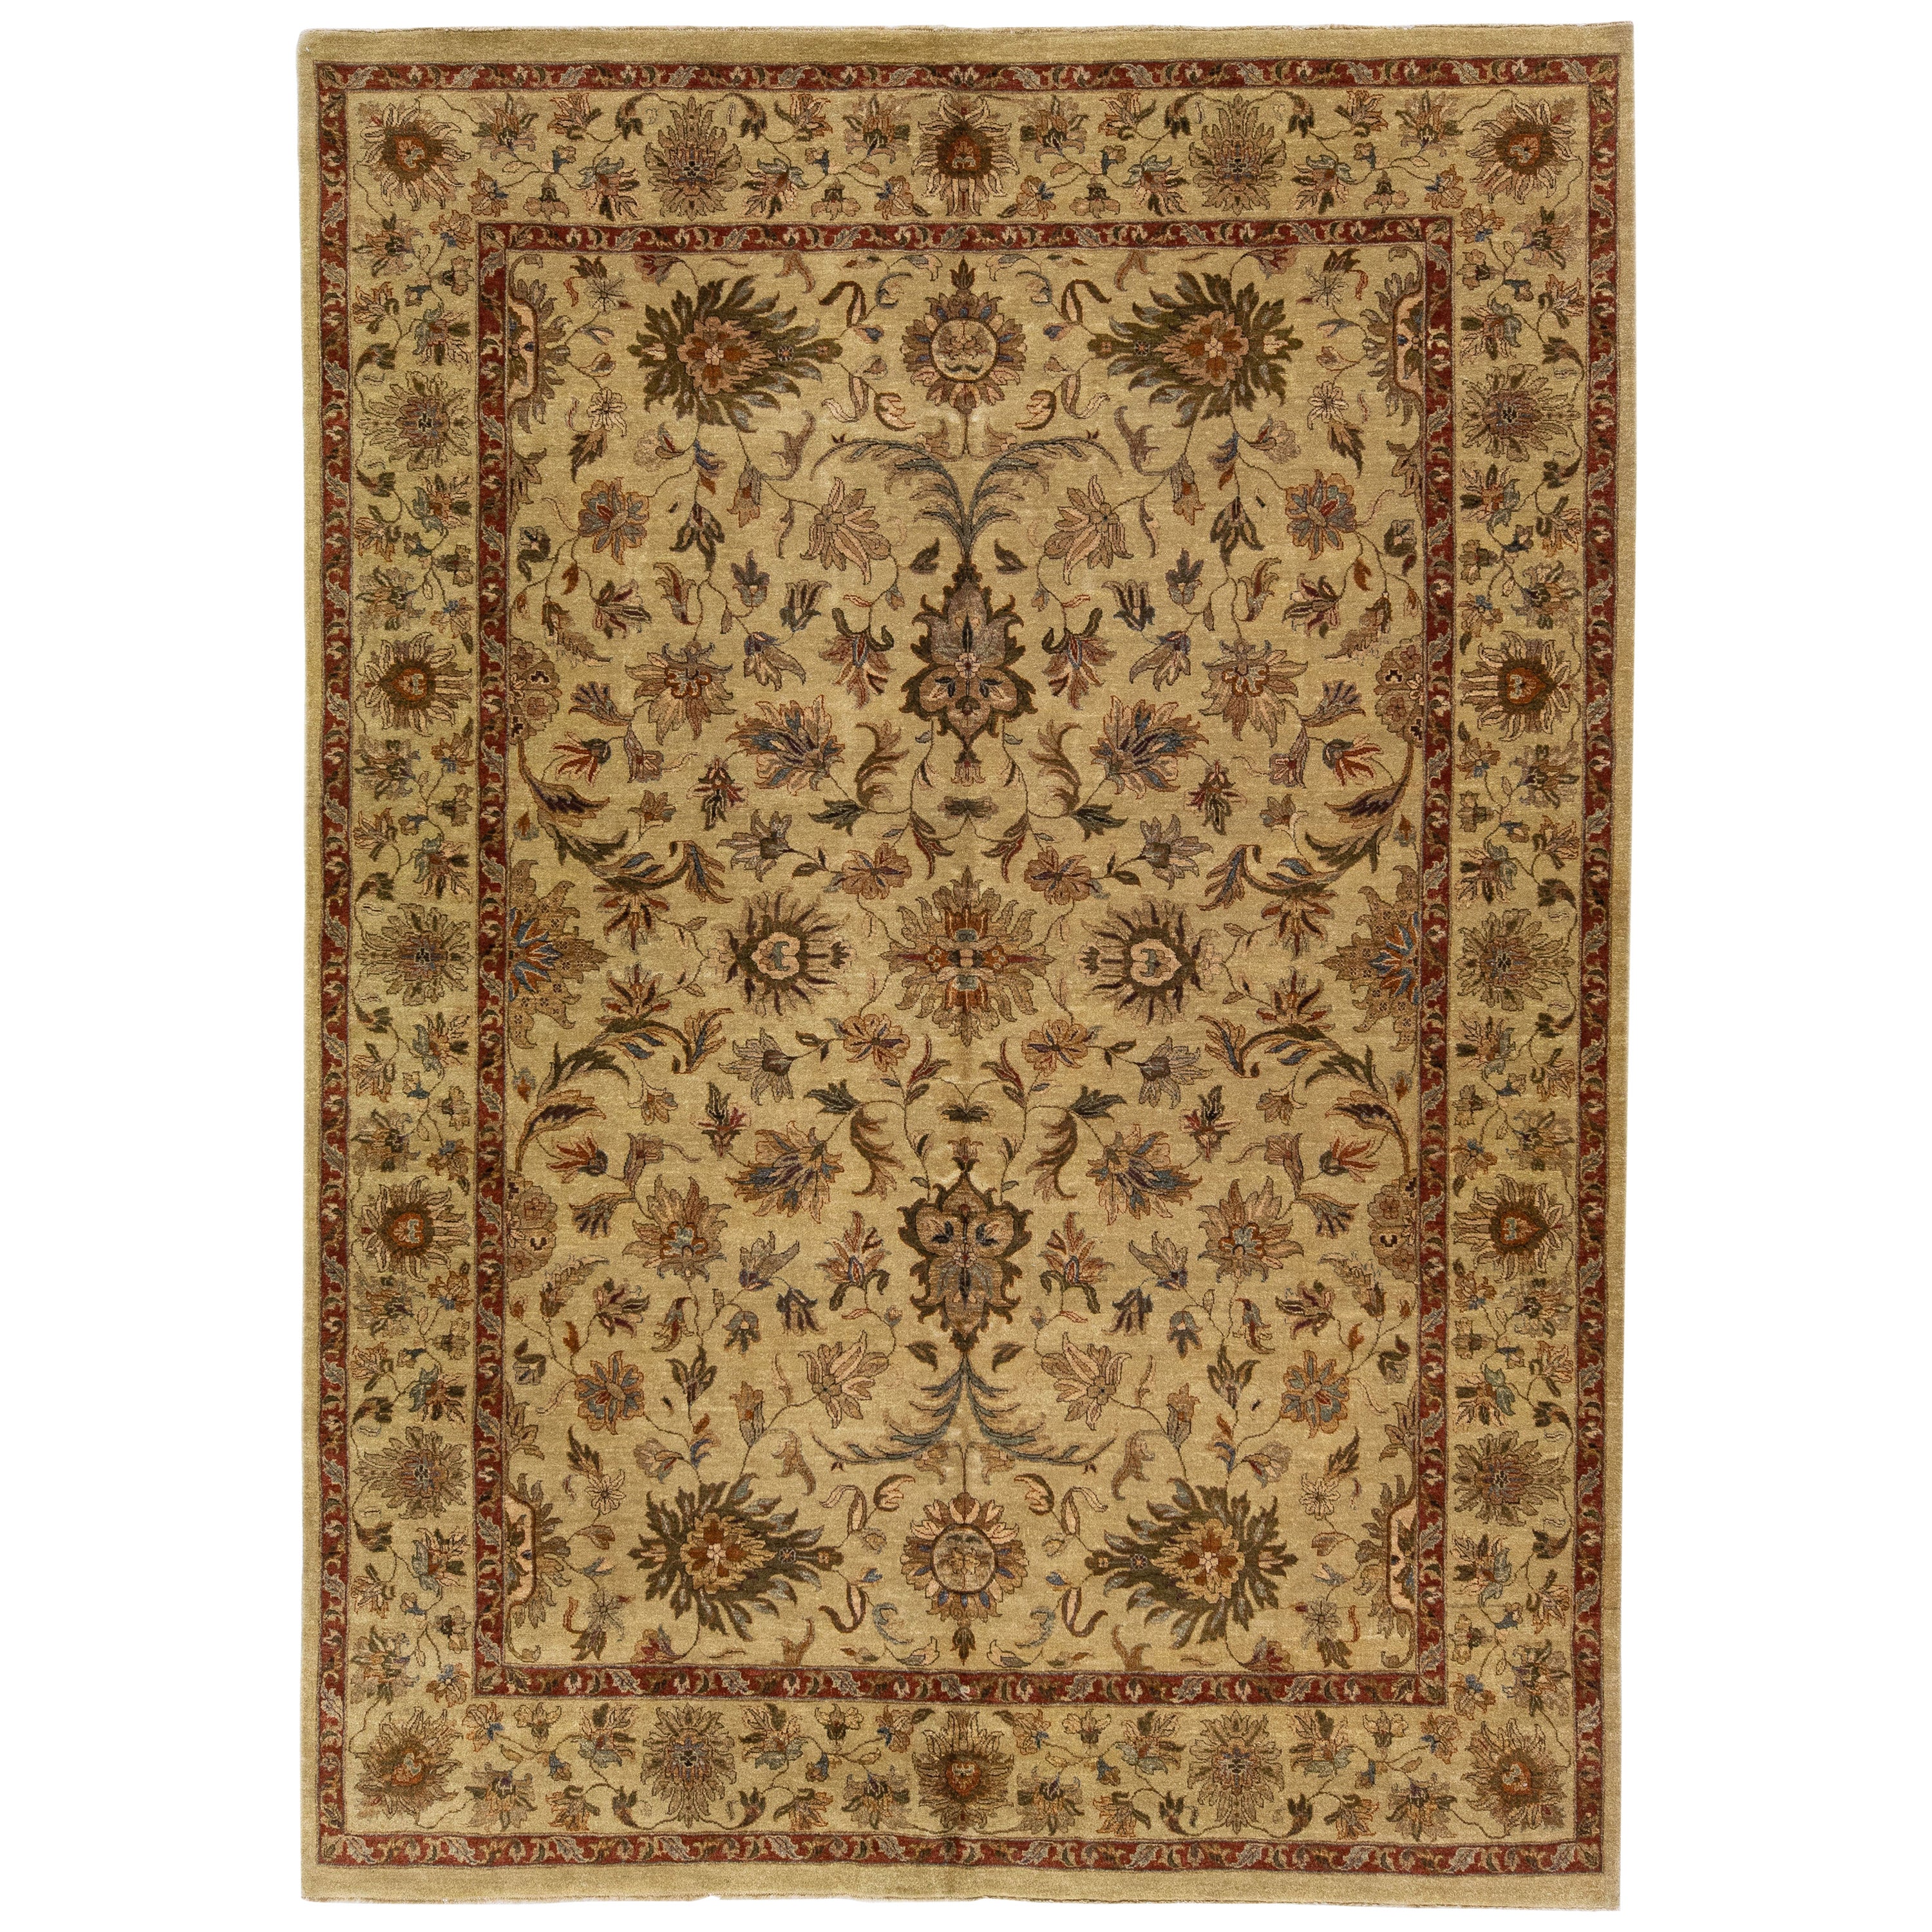 Contemporary Indian Handmade Floral Wool Rug In Tan Color For Sale